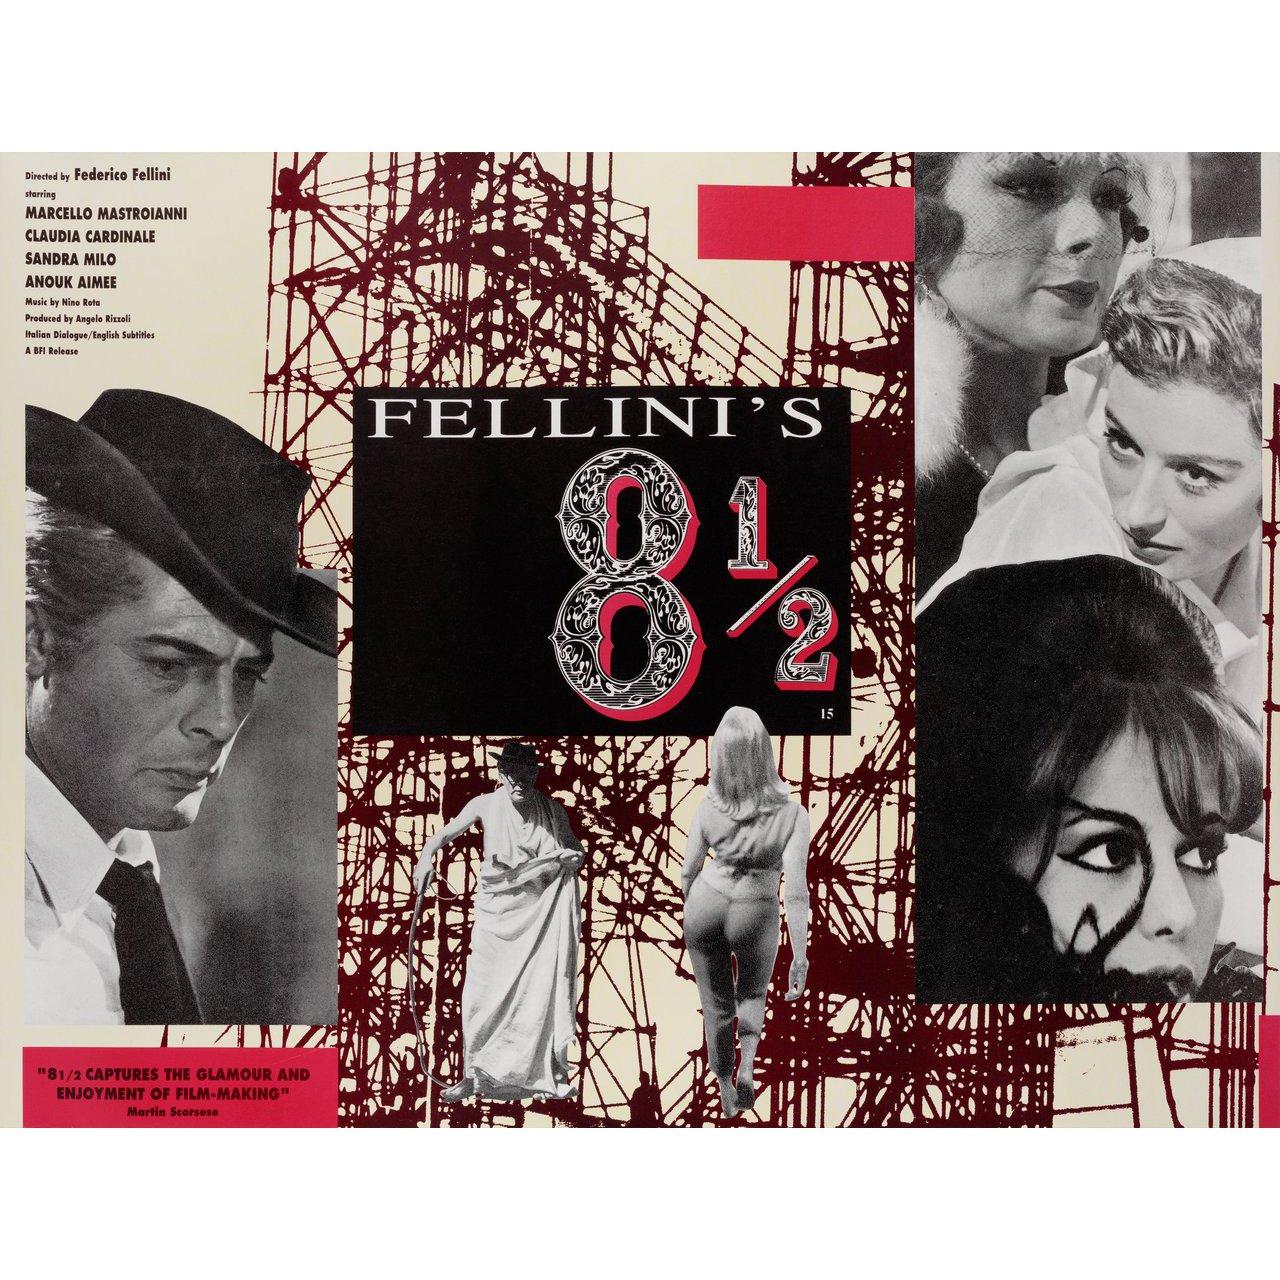 Original 1990s re-release British quad poster for the 1963 film 8 1/2 directed by Federico Fellini with Marcello Mastroianni / Claudia Cardinale / Anouk Aimee / Sandra Milo. Fine condition, linen-backed. This poster has been professionally